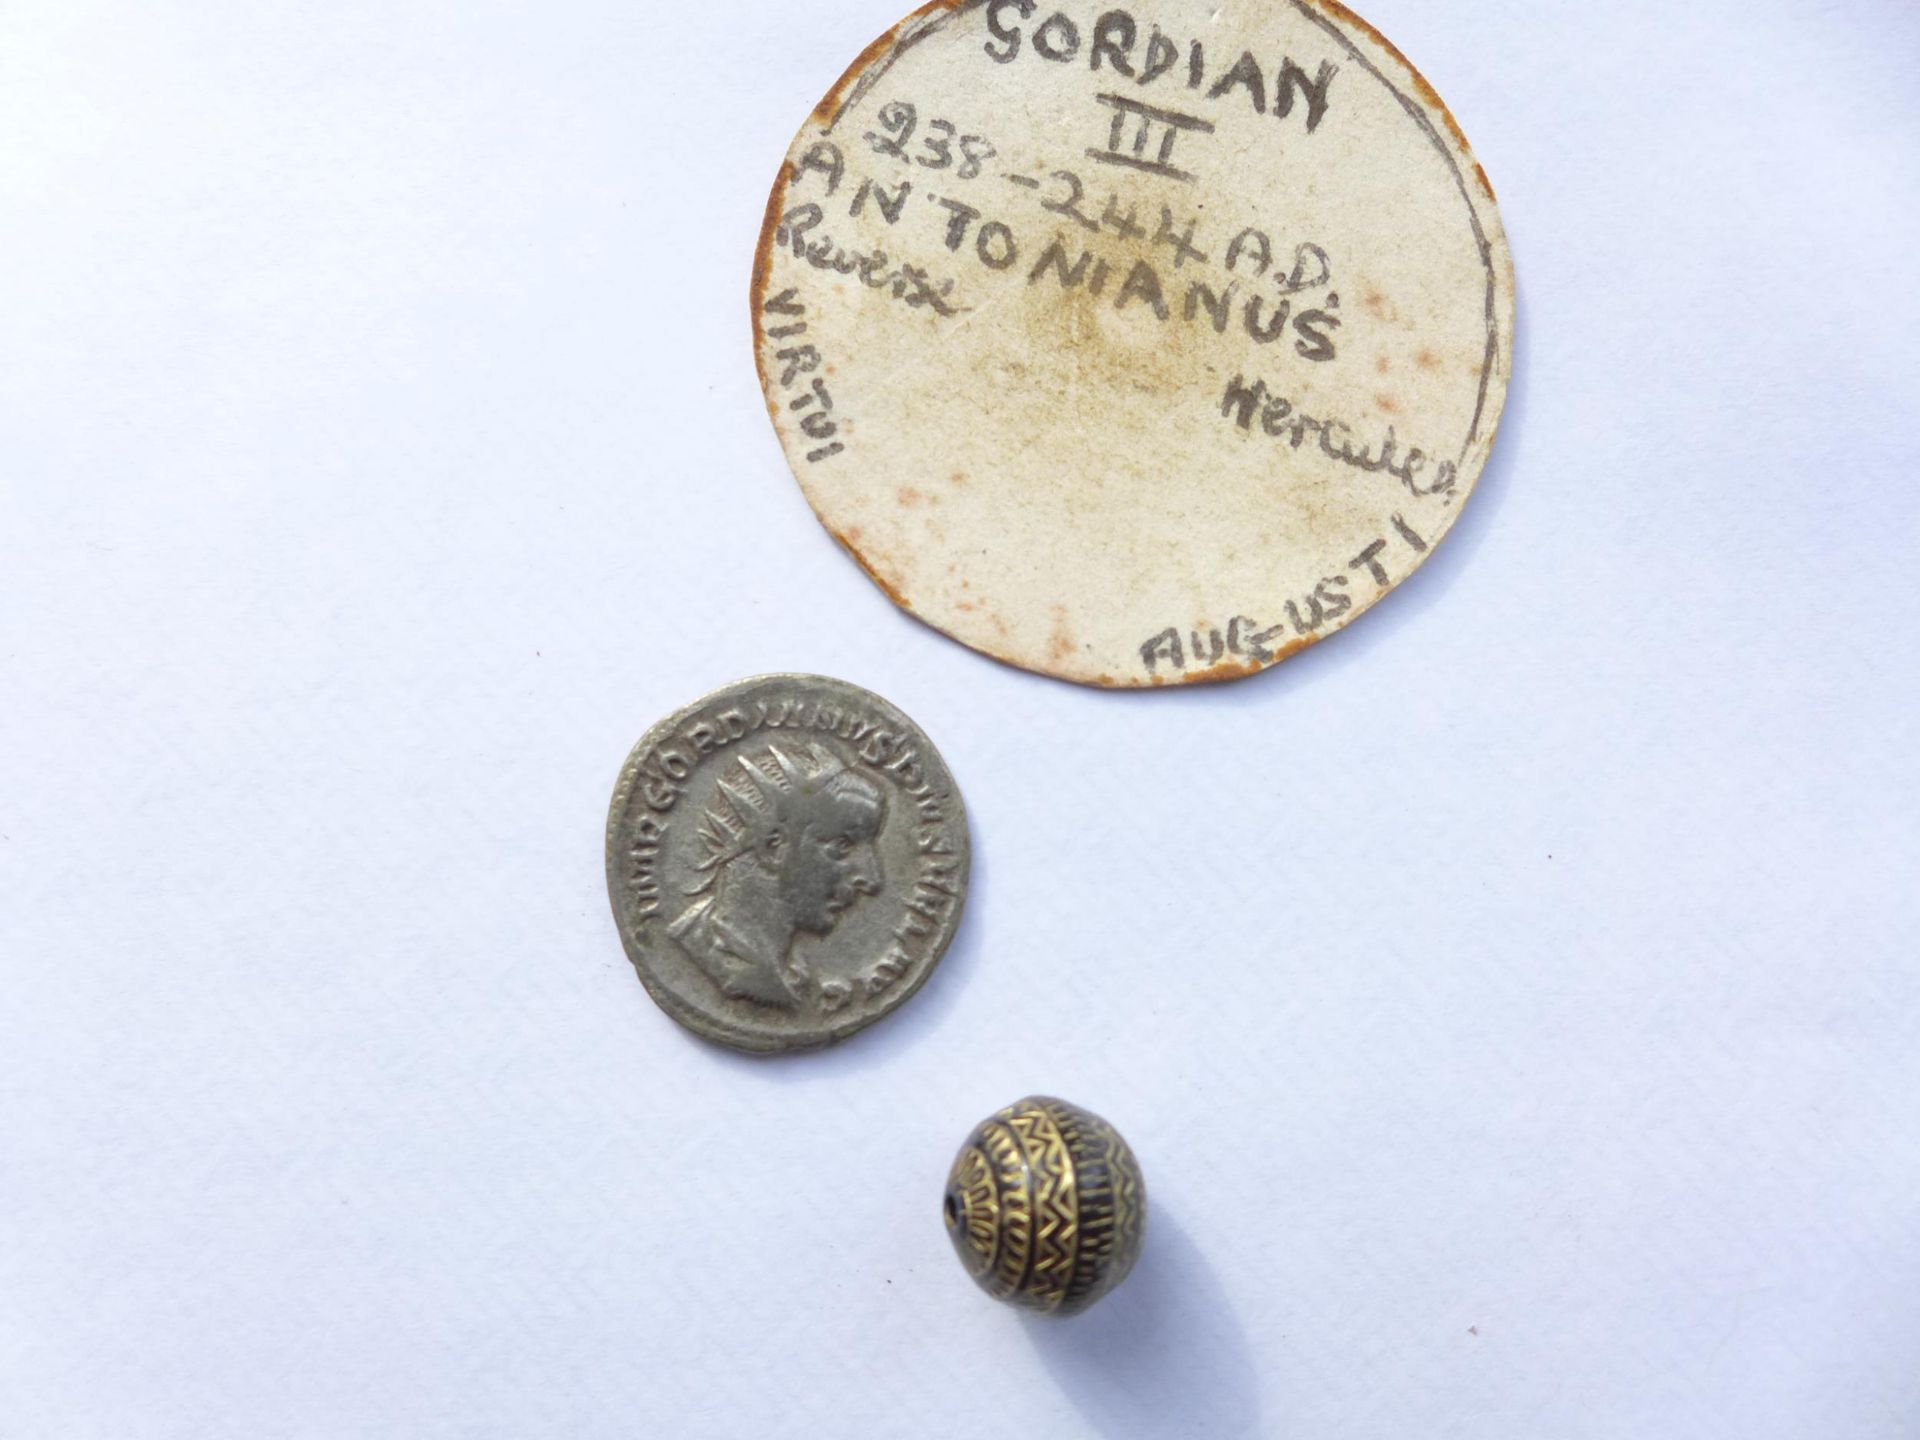 A GORDIAN III (238-244 AD) SILVER ANTONIANUS AND A SMALL METAL BEAD